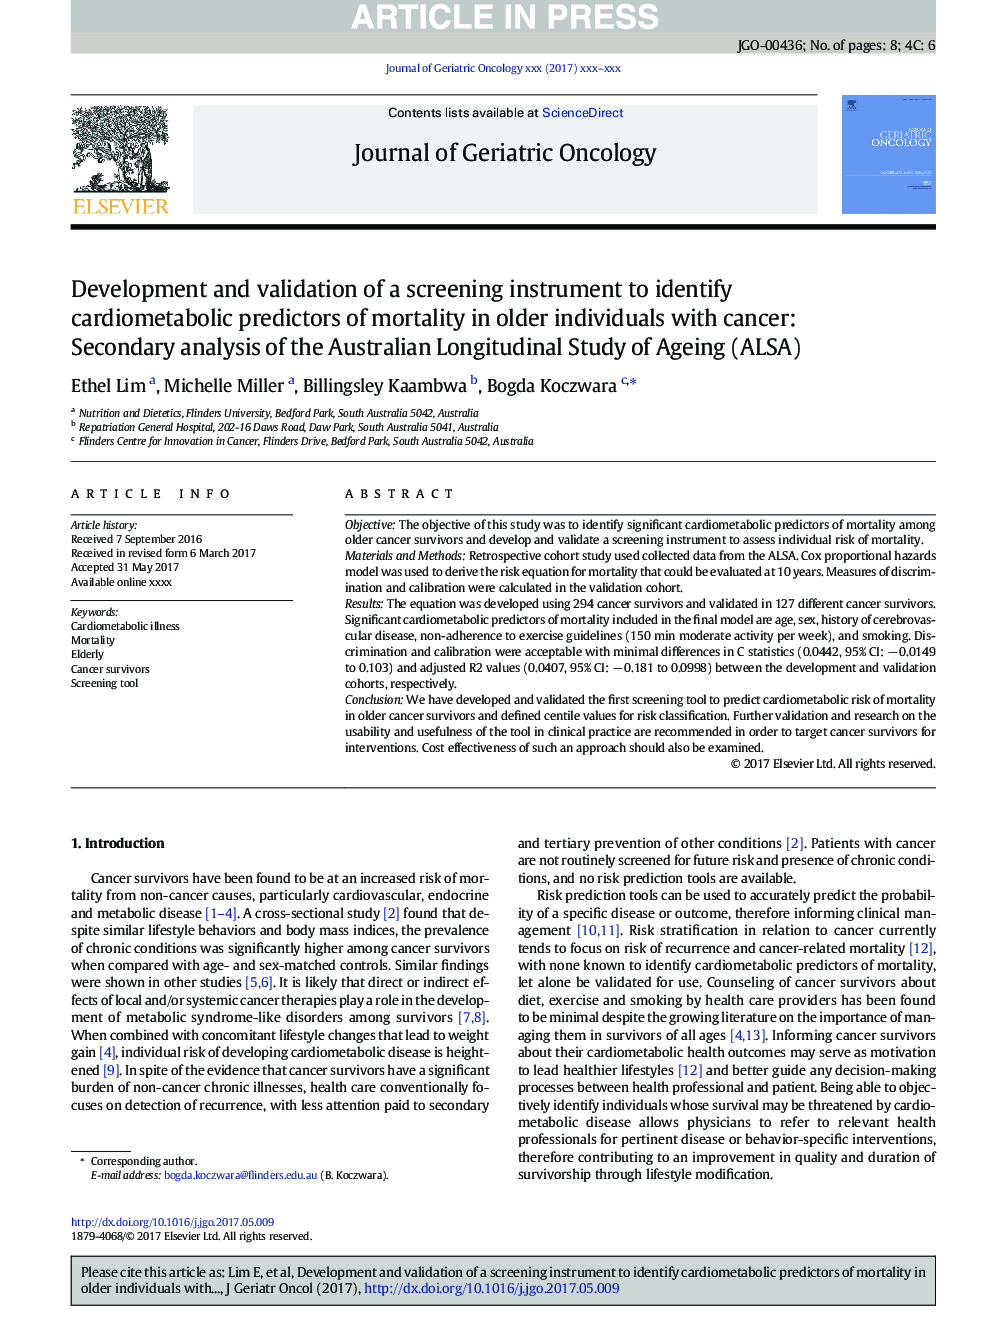 Development and validation of a screening instrument to identify cardiometabolic predictors of mortality in older individuals with cancer: Secondary analysis of the Australian Longitudinal Study of Ageing (ALSA)